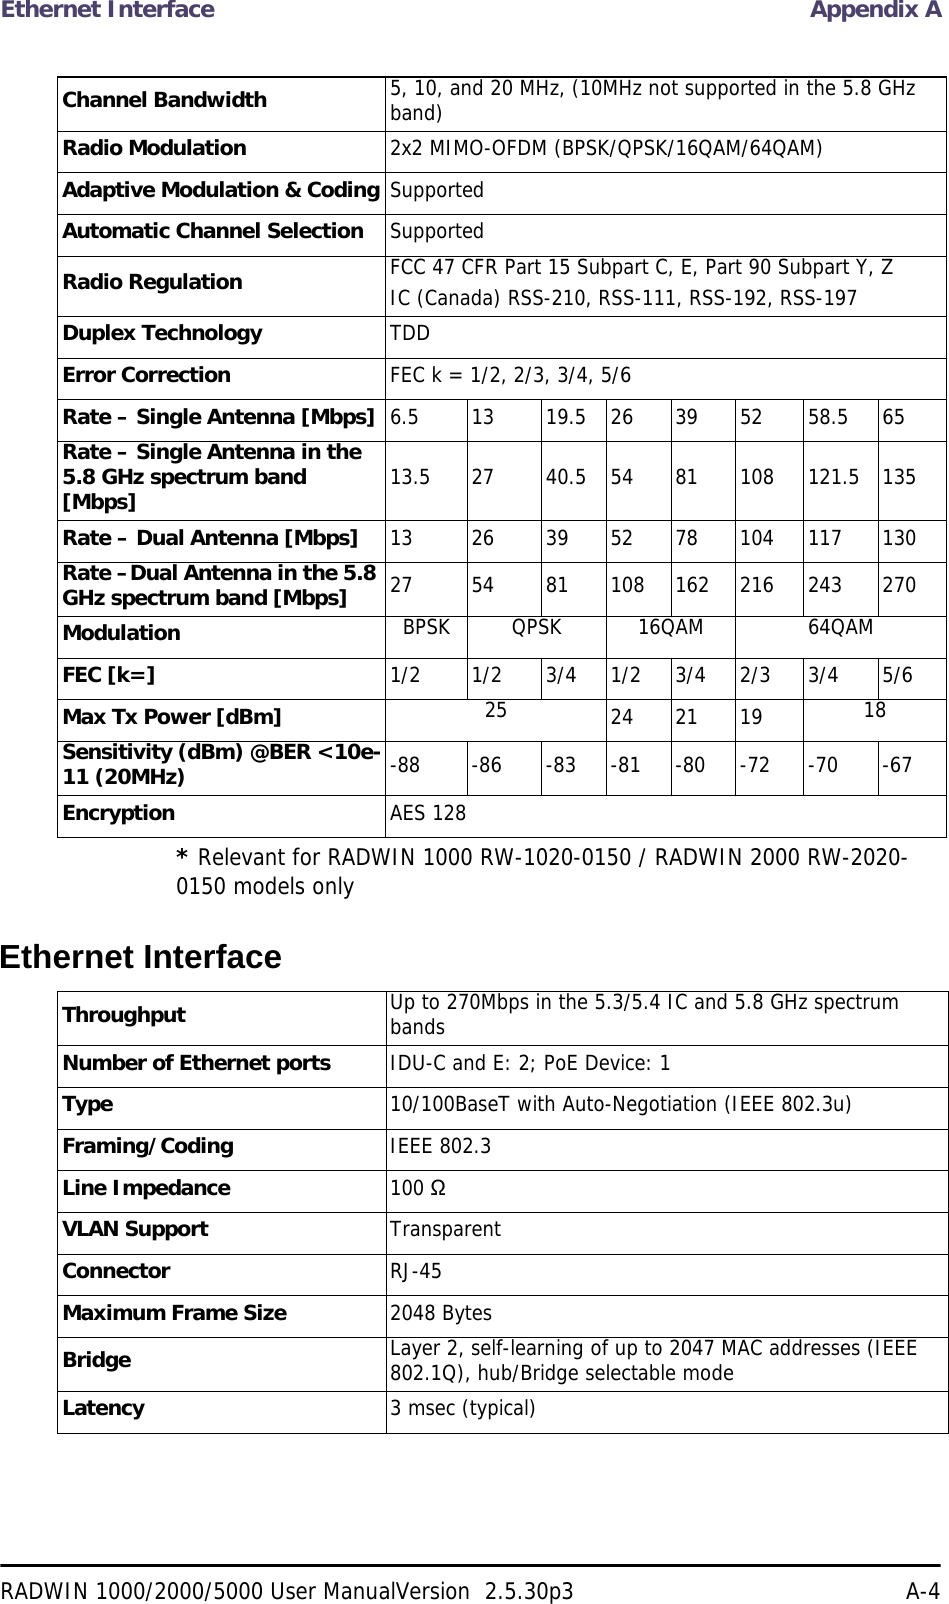 Ethernet Interface Appendix ARADWIN 1000/2000/5000 User ManualVersion  2.5.30p3 A-4* Relevant for RADWIN 1000 RW-1020-0150 / RADWIN 2000 RW-2020-0150 models onlyEthernet InterfaceChannel Bandwidth 5, 10, and 20 MHz, (10MHz not supported in the 5.8 GHz band)Radio Modulation 2x2 MIMO-OFDM (BPSK/QPSK/16QAM/64QAM)Adaptive Modulation &amp; Coding SupportedAutomatic Channel Selection SupportedRadio Regulation FCC 47 CFR Part 15 Subpart C, E, Part 90 Subpart Y, ZIC (Canada) RSS-210, RSS-111, RSS-192, RSS-197Duplex Technology TDDError Correction FEC k = 1/2, 2/3, 3/4, 5/6Rate – Single Antenna [Mbps] 6.5 13 19.5 26 39 52 58.5 65Rate – Single Antenna in the 5.8 GHz spectrum band [Mbps] 13.5 27 40.5 54 81 108 121.5 135Rate – Dual Antenna [Mbps] 13 26 39 52 78 104 117 130Rate –Dual Antenna in the 5.8 GHz spectrum band [Mbps] 27 54 81 108 162 216 243 270Modulation BPSK QPSK 16QAM 64QAMFEC [k=] 1/2 1/2 3/4 1/2 3/4 2/3 3/4 5/6Max Tx Power [dBm] 25 24 21 19 18Sensitivity (dBm) @BER &lt;10e-11 (20MHz) -88 -86 -83 -81 -80 -72 -70 -67Encryption AES 128Throughput Up to 270Mbps in the 5.3/5.4 IC and 5.8 GHz spectrum bandsNumber of Ethernet ports IDU-C and E: 2; PoE Device: 1Type 10/100BaseT with Auto-Negotiation (IEEE 802.3u)Framing/Coding IEEE 802.3Line Impedance 100 ΩVLAN Support TransparentConnector RJ-45Maximum Frame Size 2048 BytesBridge Layer 2, self-learning of up to 2047 MAC addresses (IEEE 802.1Q), hub/Bridge selectable modeLatency 3 msec (typical)